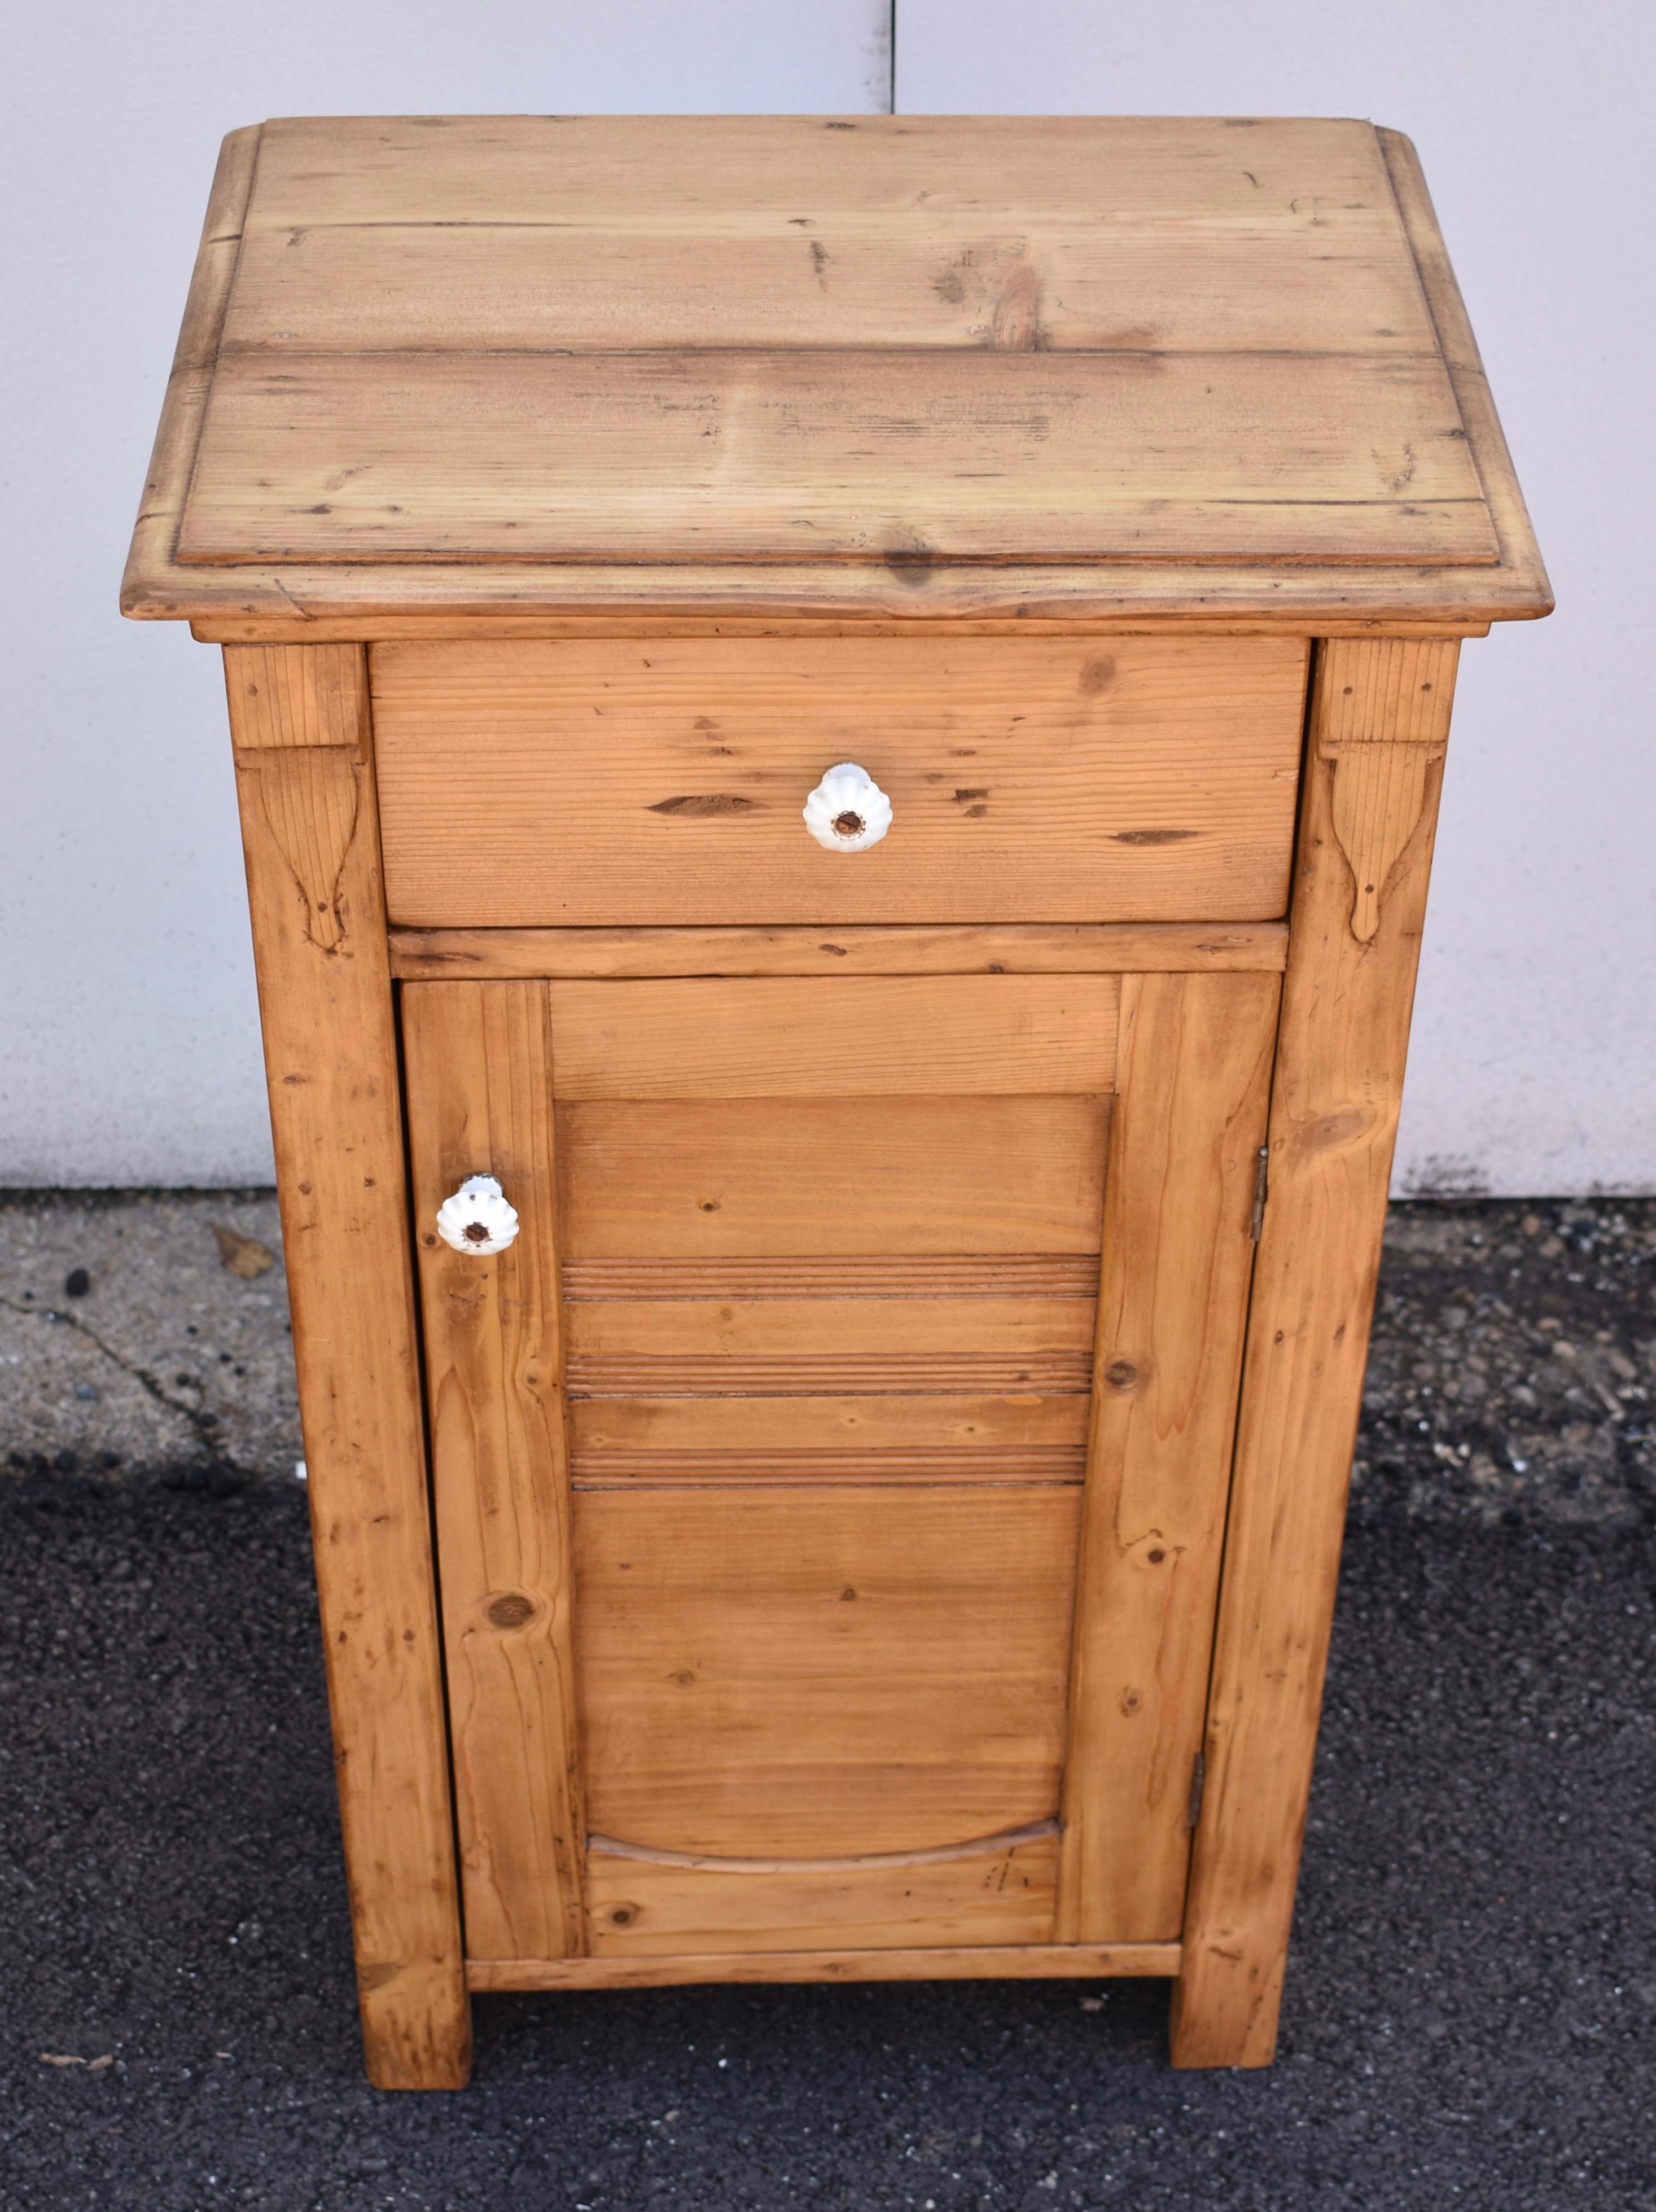 Larger than most, this pine nightstand is an unusual variation on a common theme. The top has a step-down routed edge with concave molding beneath, to form a crown. The sides are paneled with the stiles running top to floor to form the feet. A